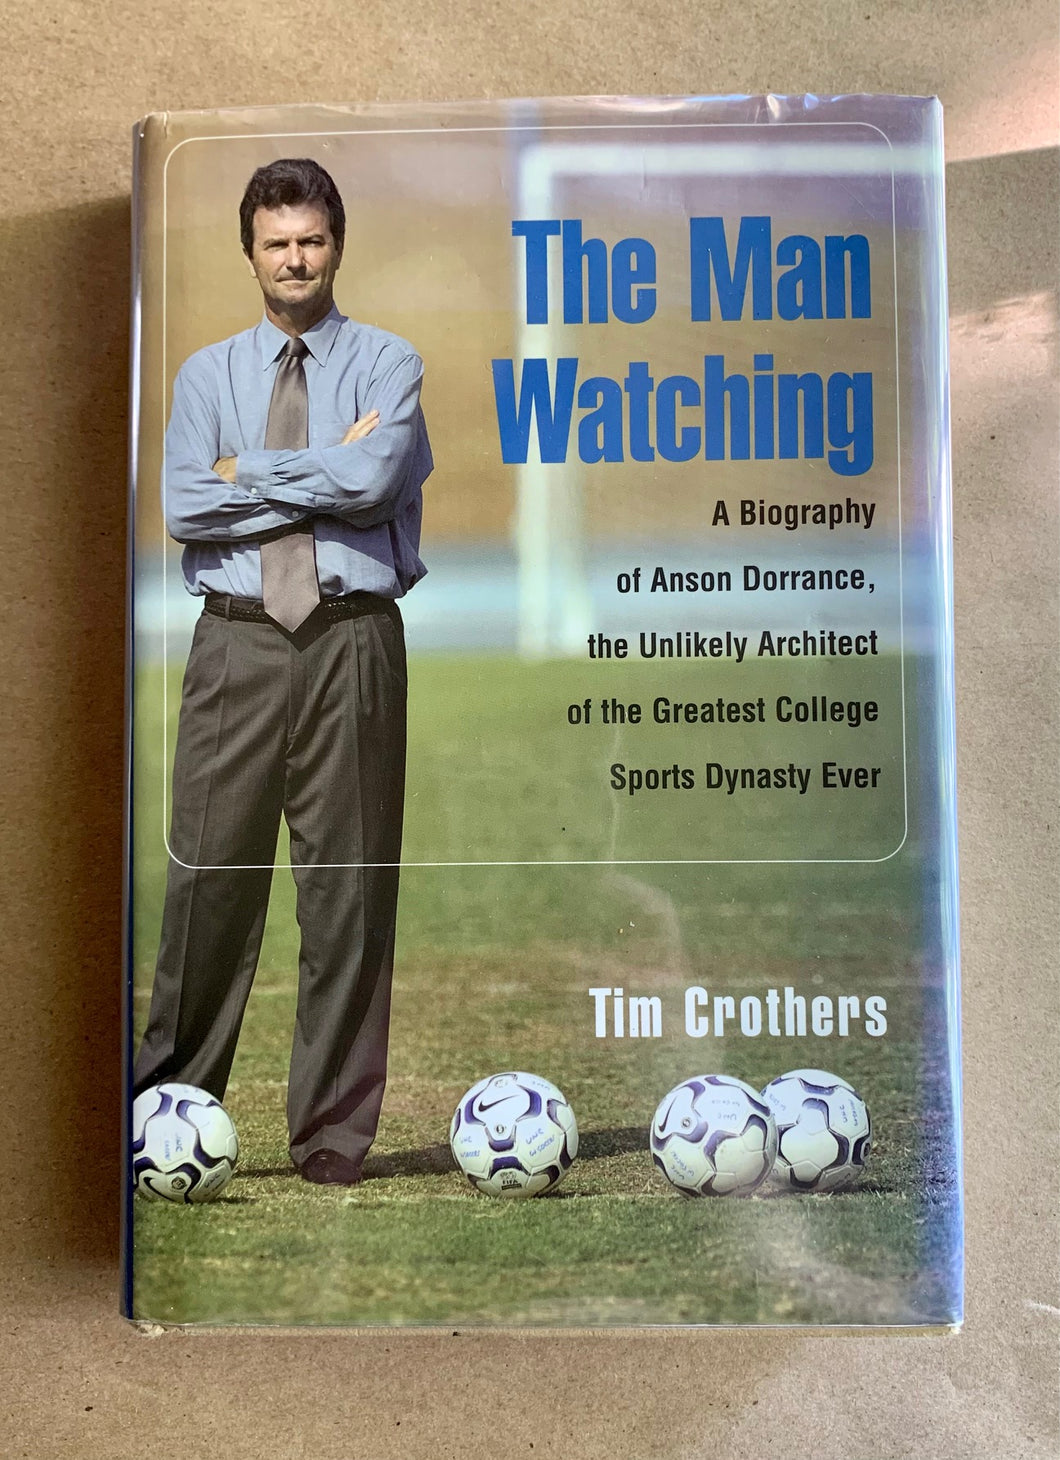 The Man Watching by Tim Crothers Anson Dorrance SIGNED Autographed Biography UNC